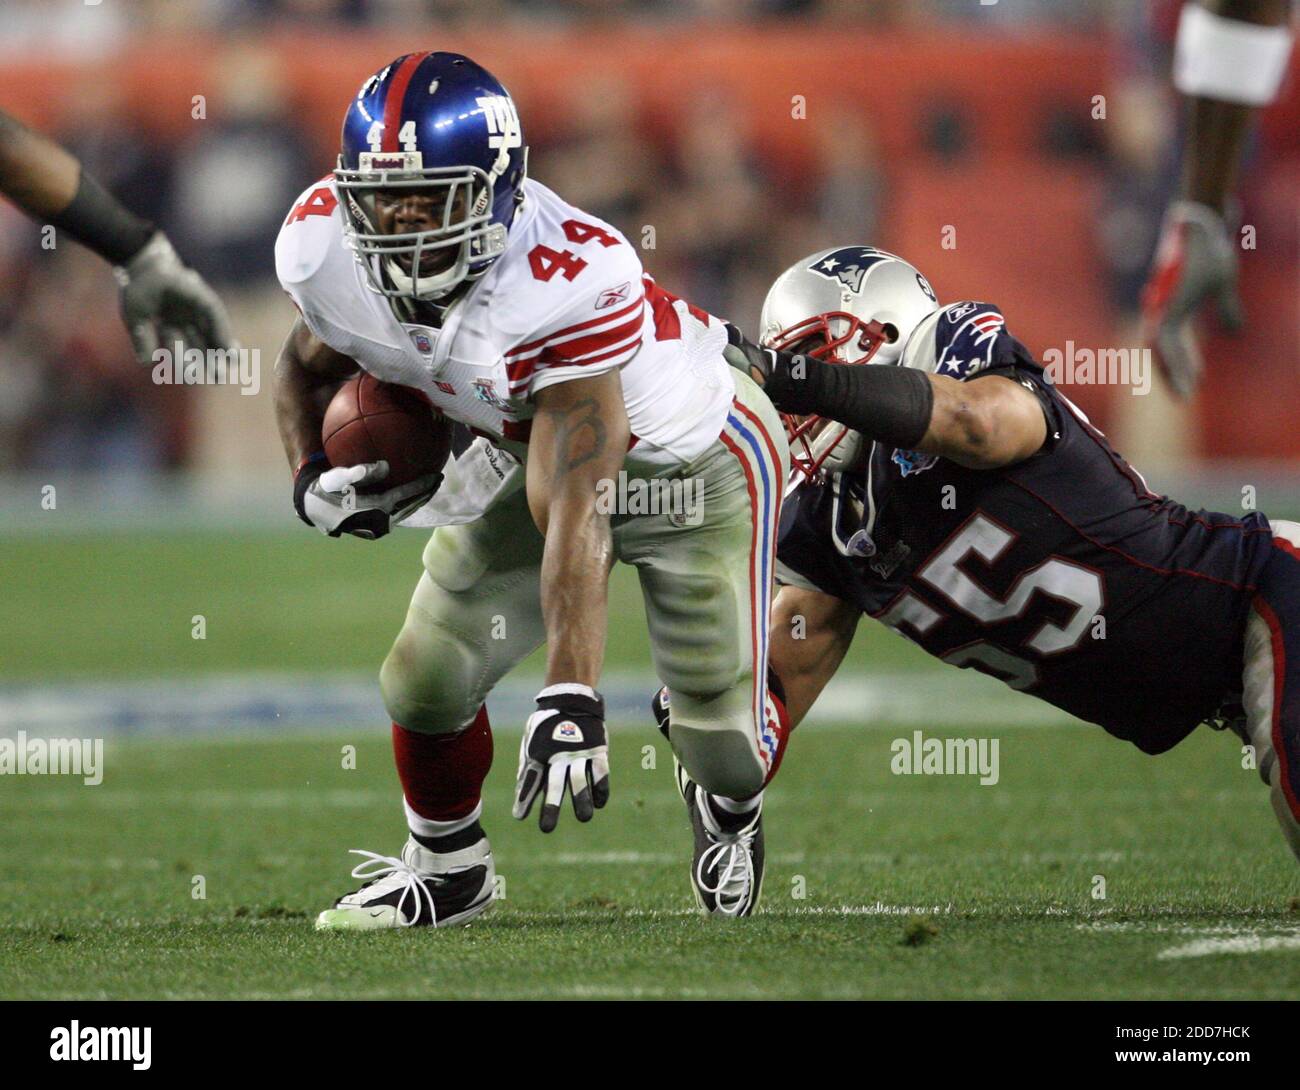 The New York Giants' Ahmad Bradshaw (44) makes a gain against the New England Patriots' Junior Seau (55) in the first half of Super Bowl XLII at University of Phoenix Stadium in Glendale, AZ, USA on February 3, 2008.  The NY Giants won 17-14. Photo by Gary W. Green/MCT/Cameleon/ABACAPRESS.COM Stock Photo